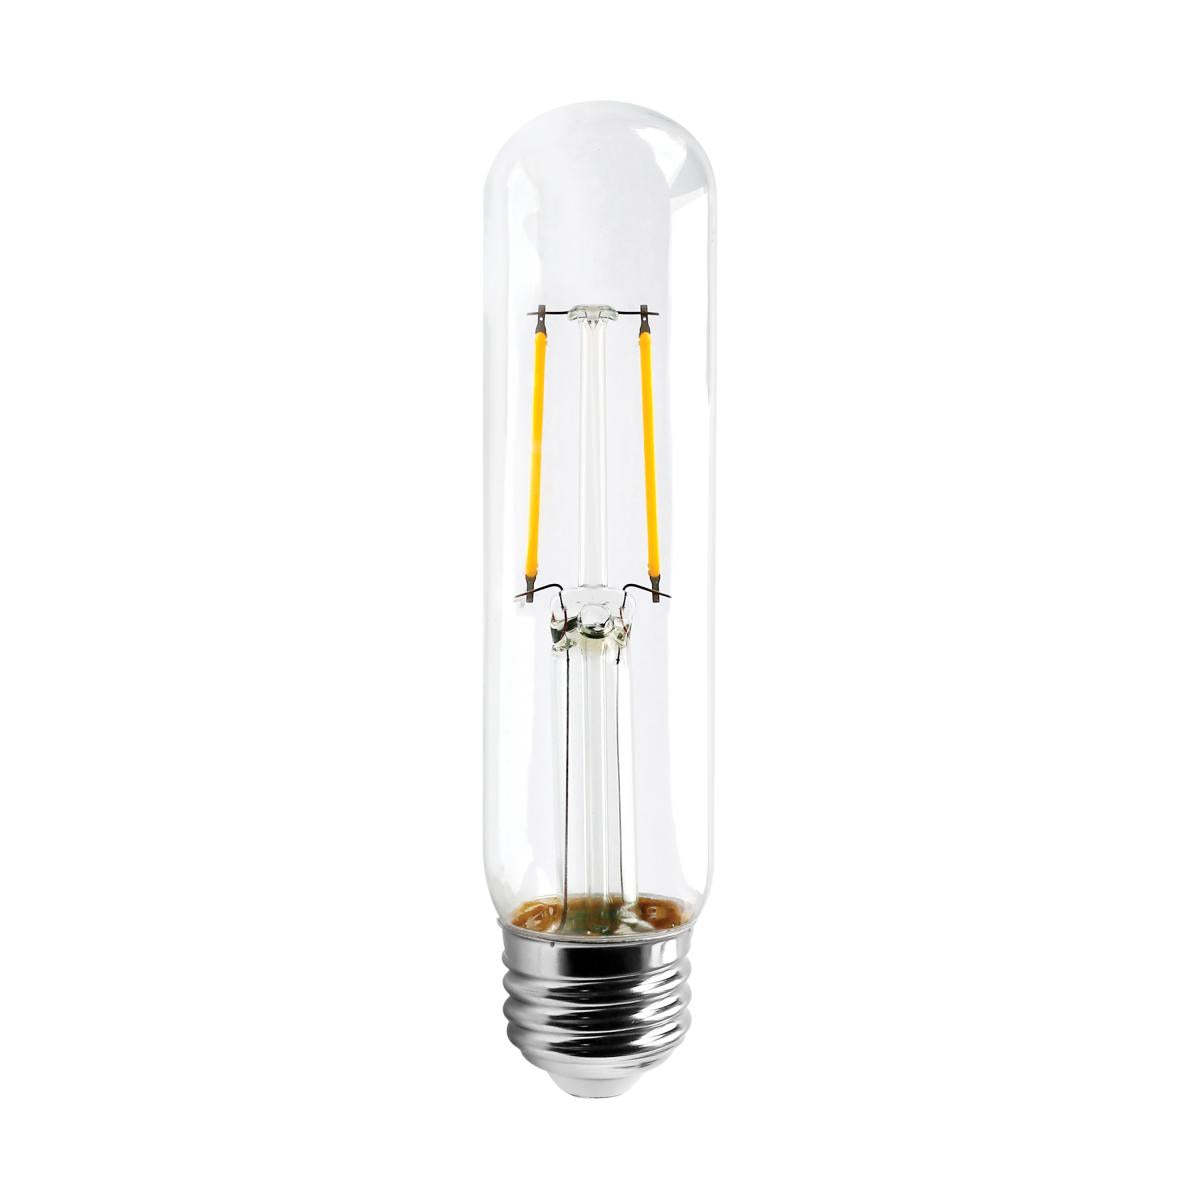 Replacement for Satco S11381 4.3 Watt T10 LED Clear Medium base 3000K 350 Lumens 120 Volt - NOW S21345